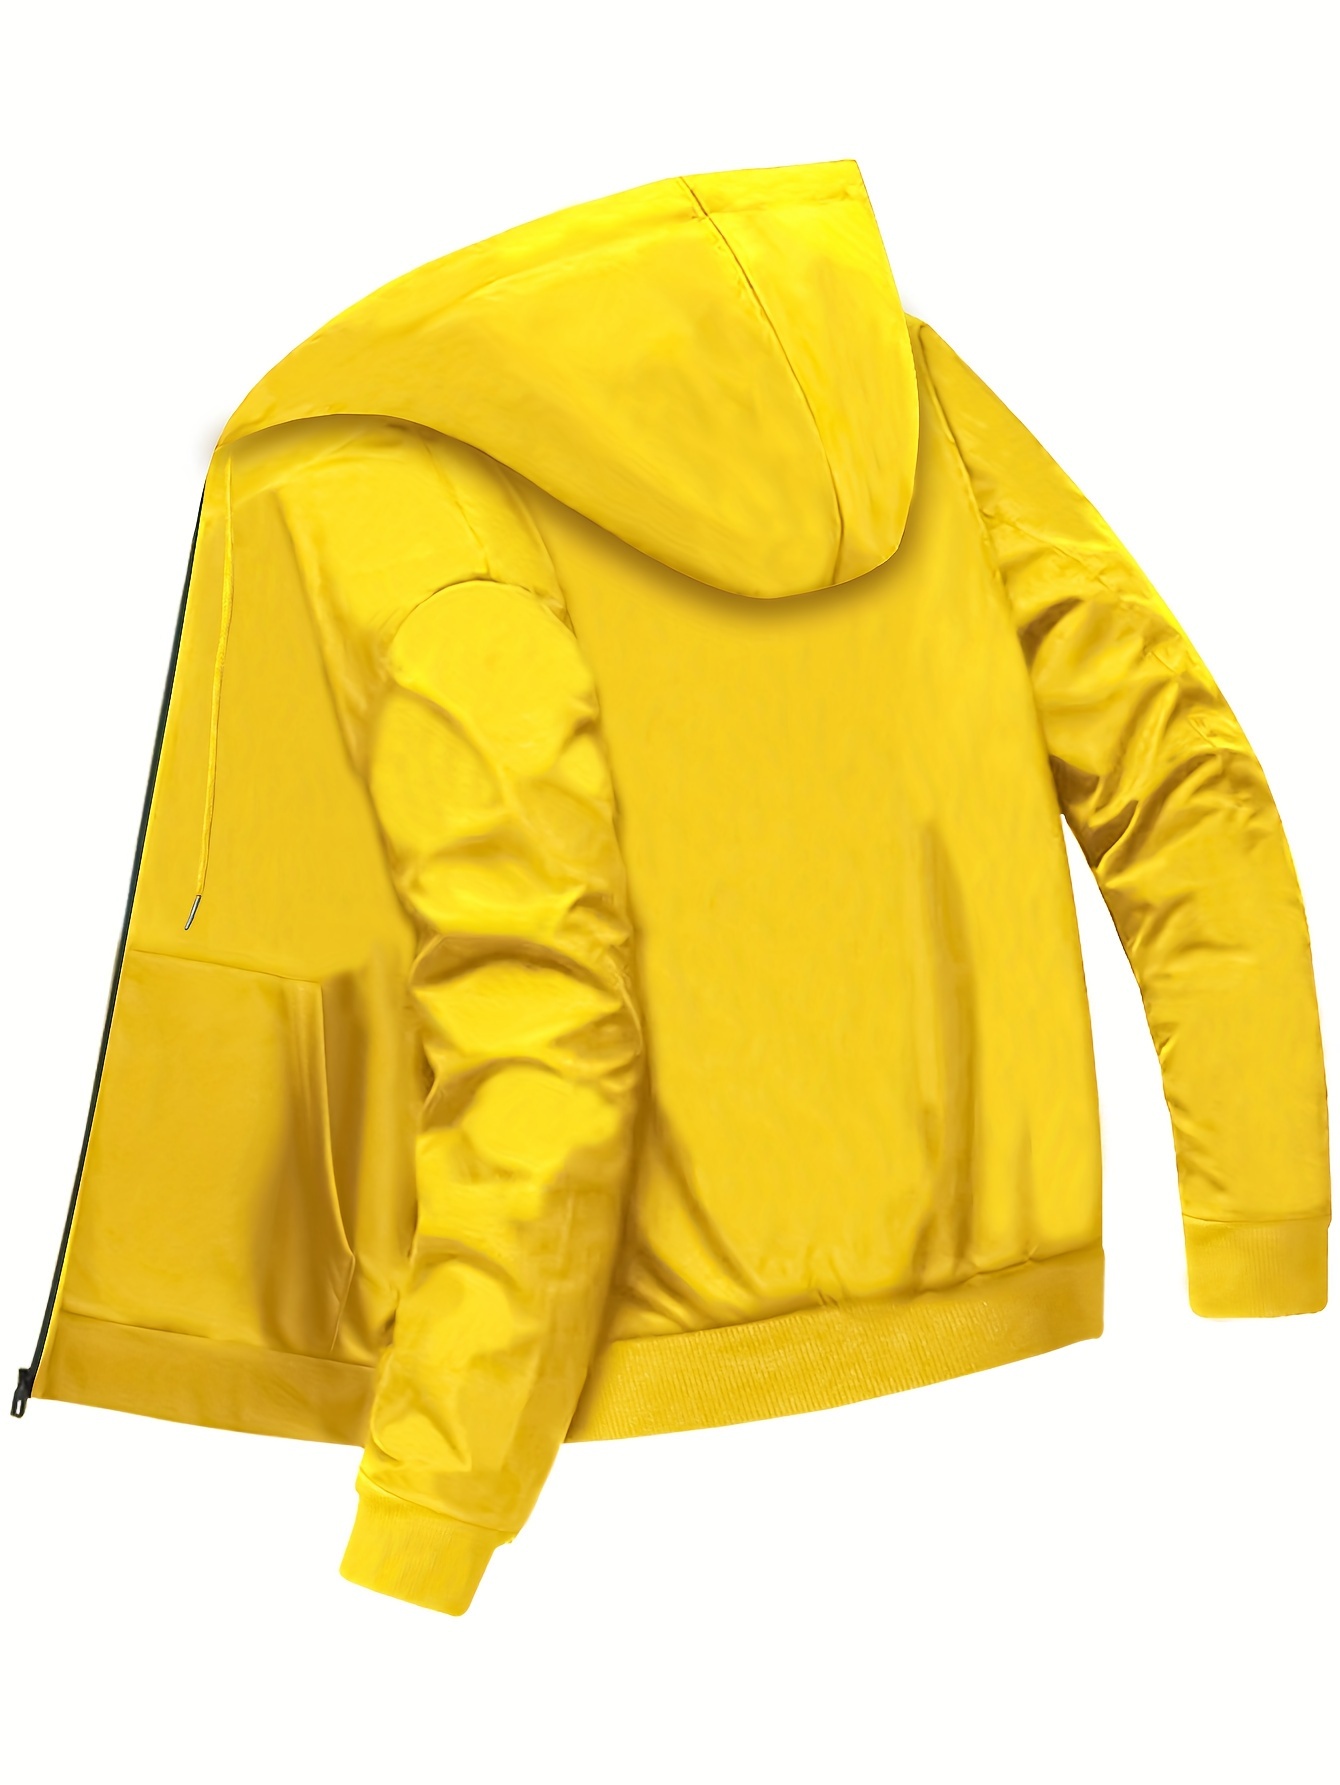 Ovticza Soccer Hoodies for Men Lightweight Drawstring Pocket Hooded Thin  Long Sleeve Solid Color Pullover Cute Sweatshirt Men Yellow 3XL 